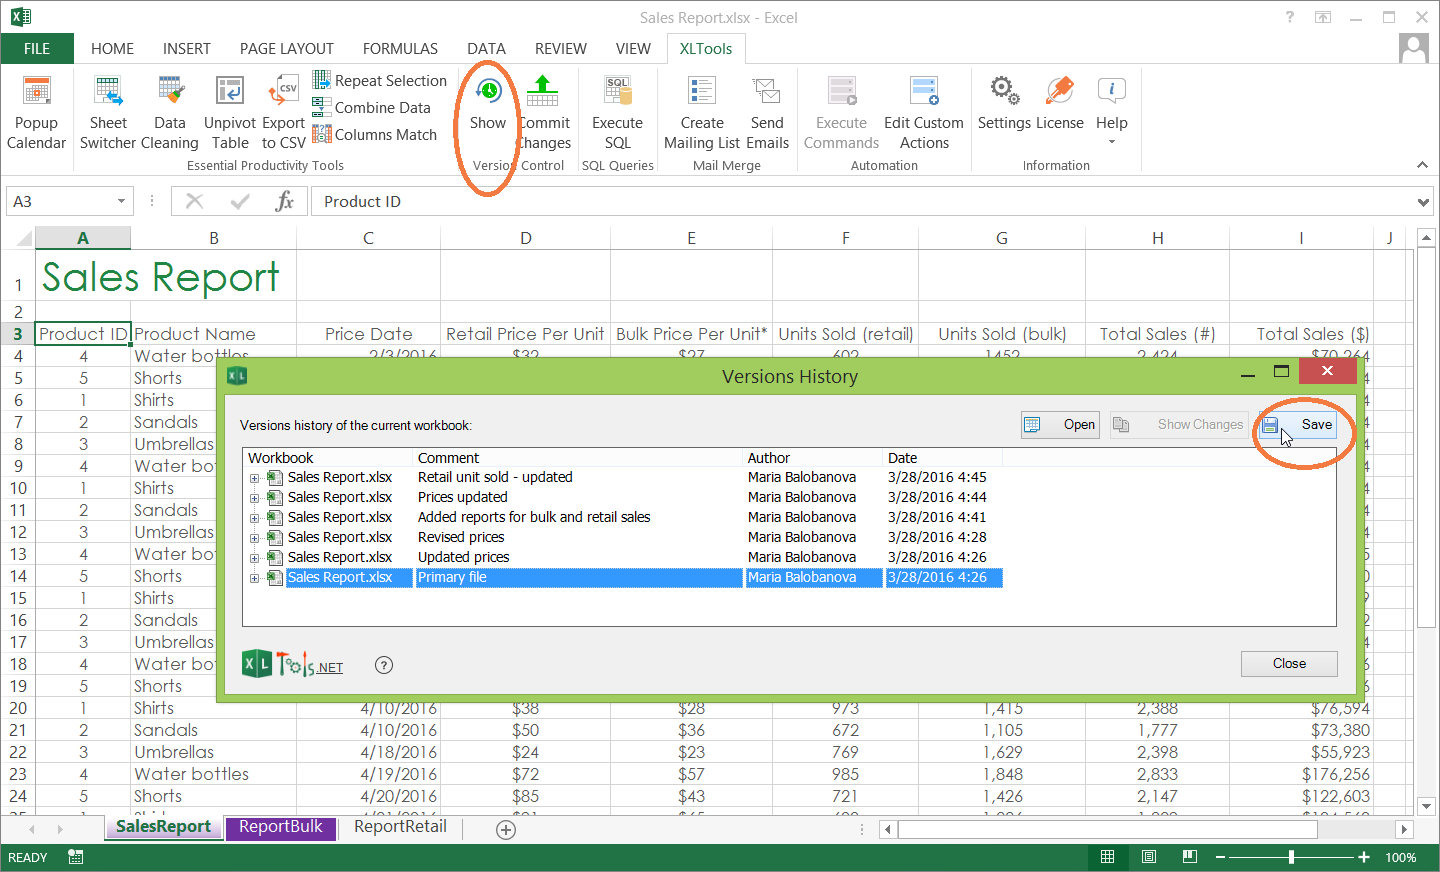 Spreadsheet Version Control In Version Control For Excel Spreadsheets  Xltools – Excel Addins You